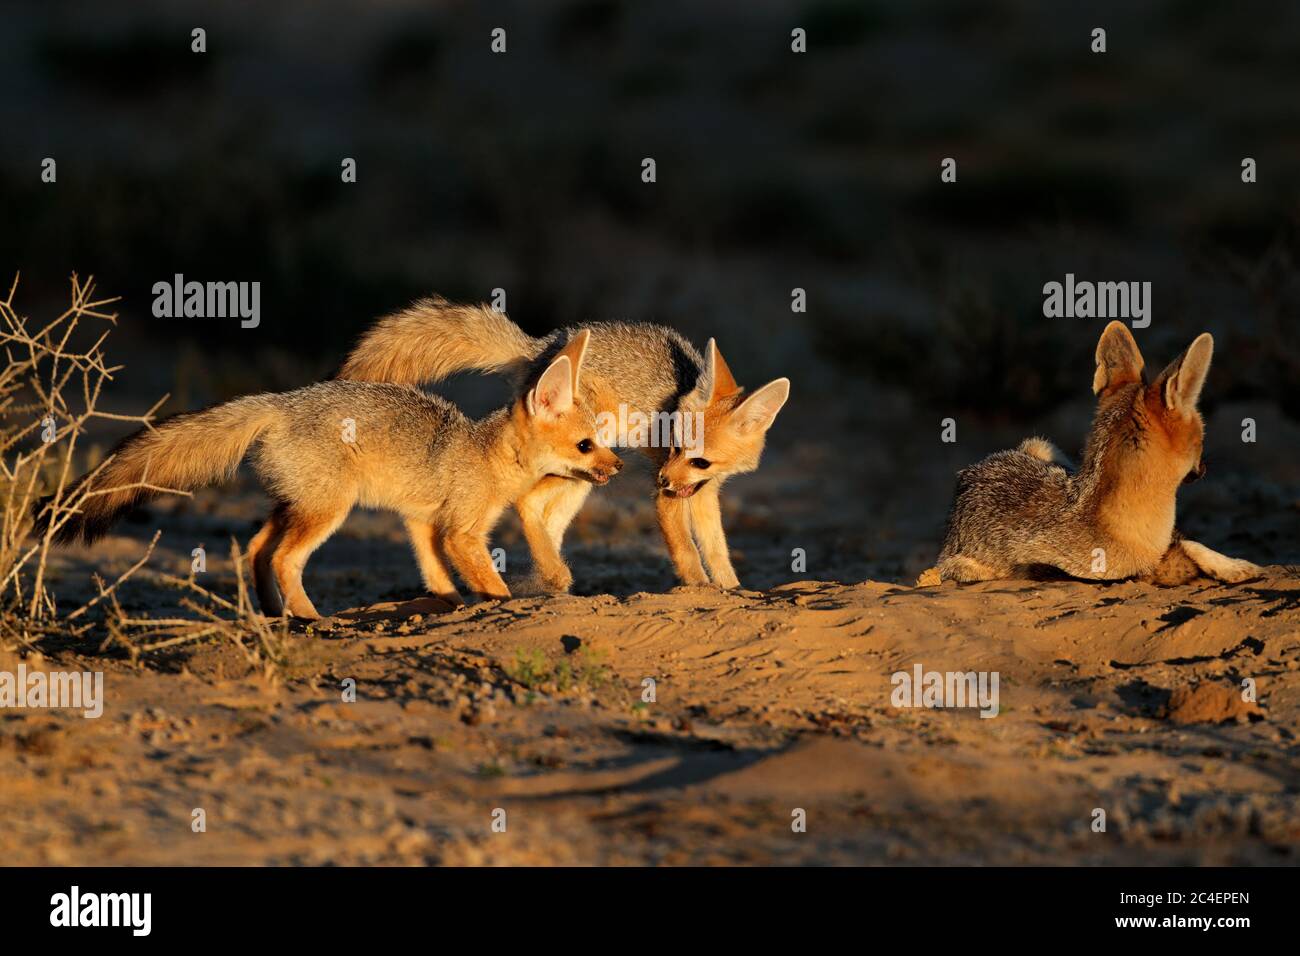 Cape foxes (Vulpes chama) at their den in early morning light, Kalahari desert, South Africa Stock Photo